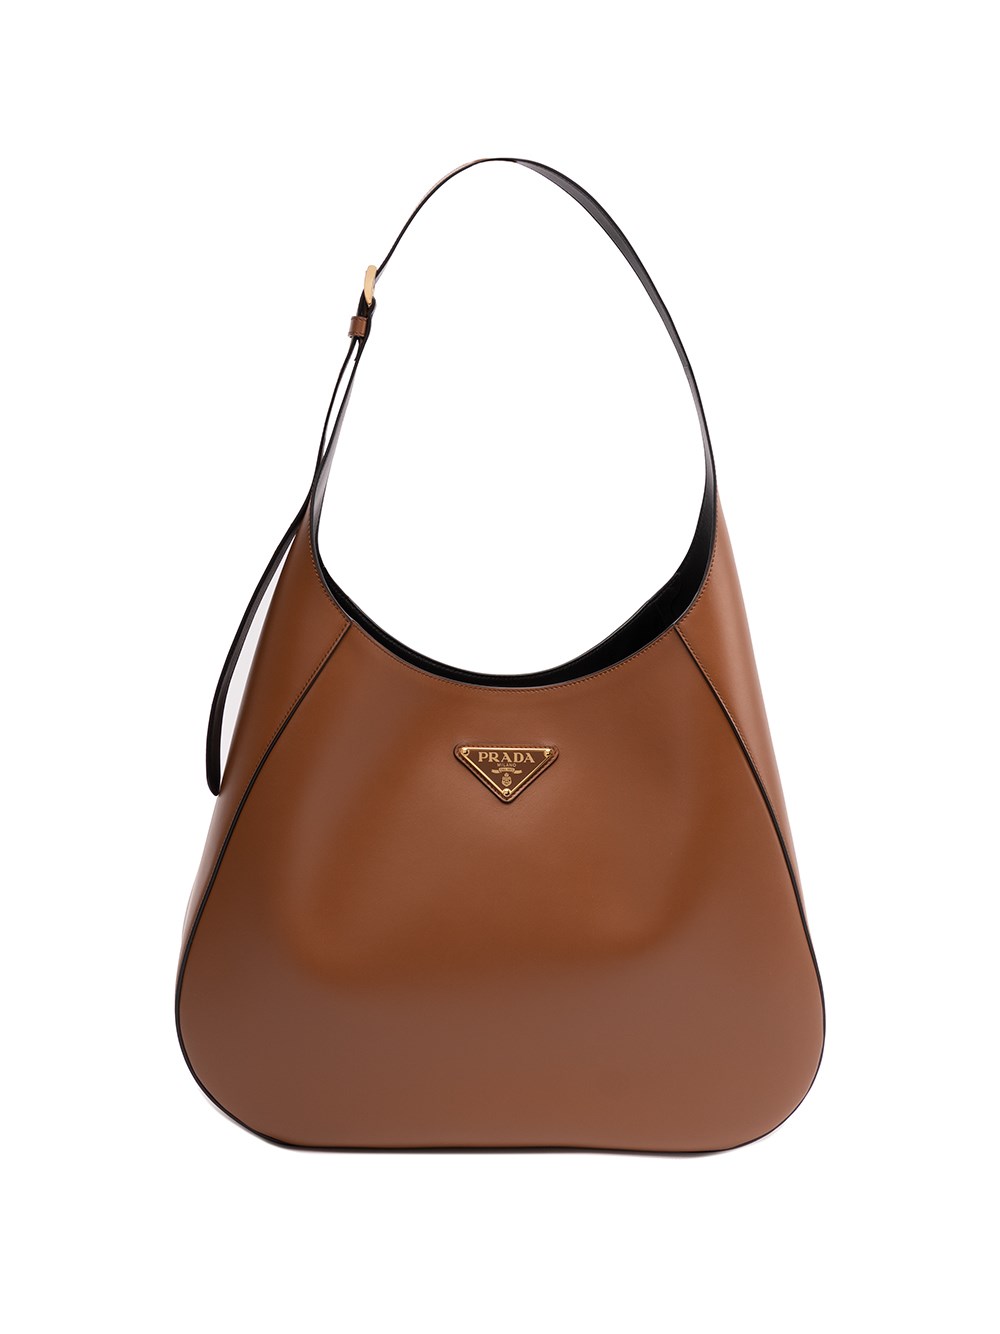 Large leather shoulder bag with topstitching